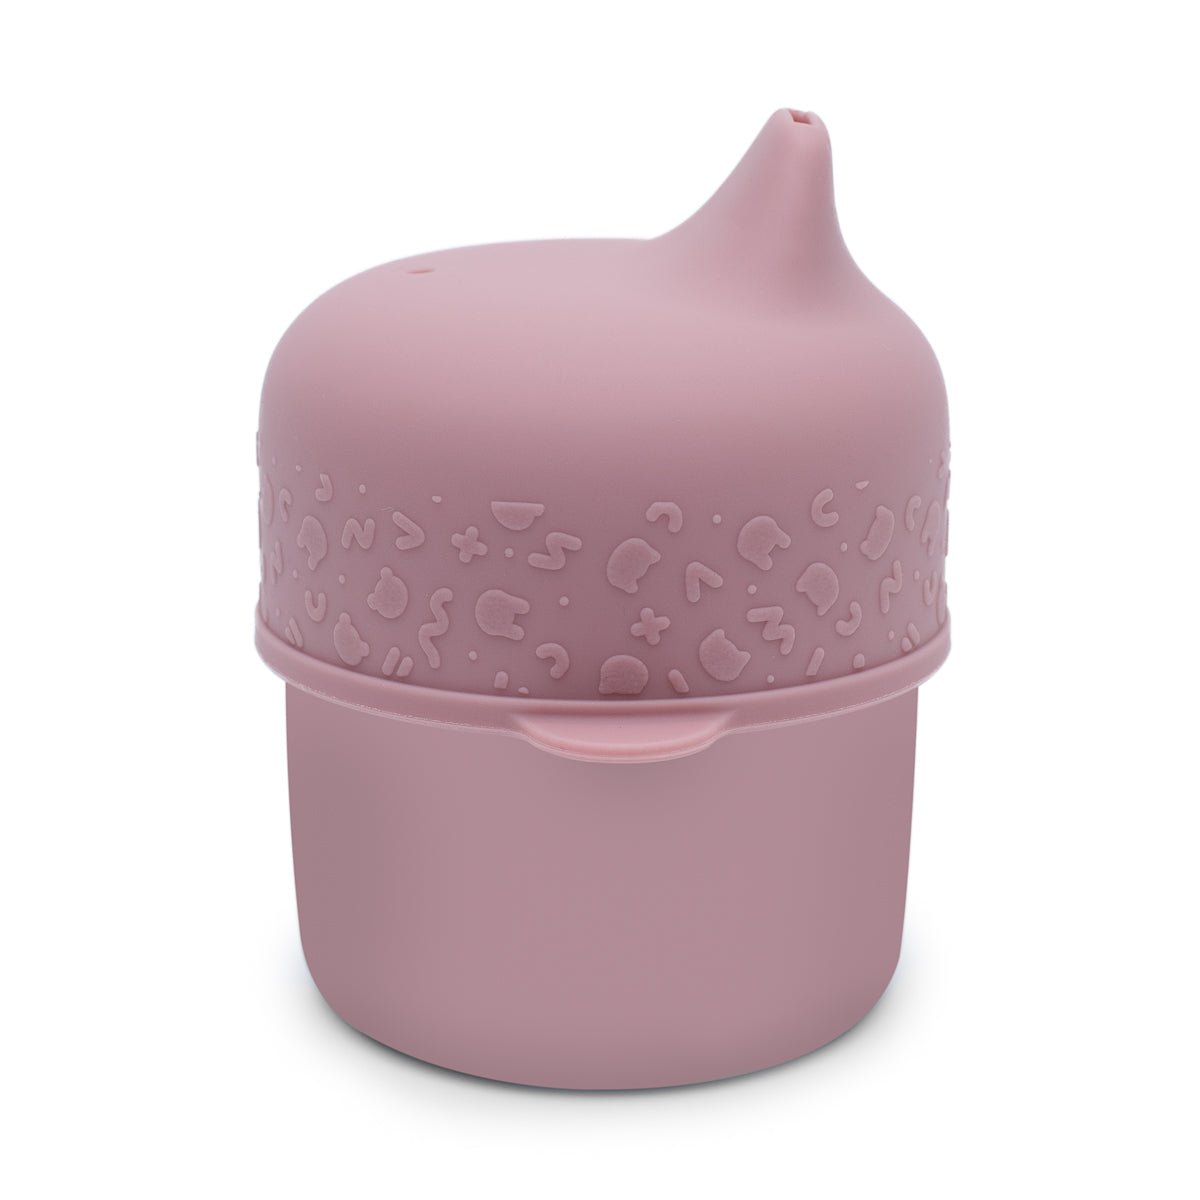 Sippie Cup Set in Dusty Rose without straw